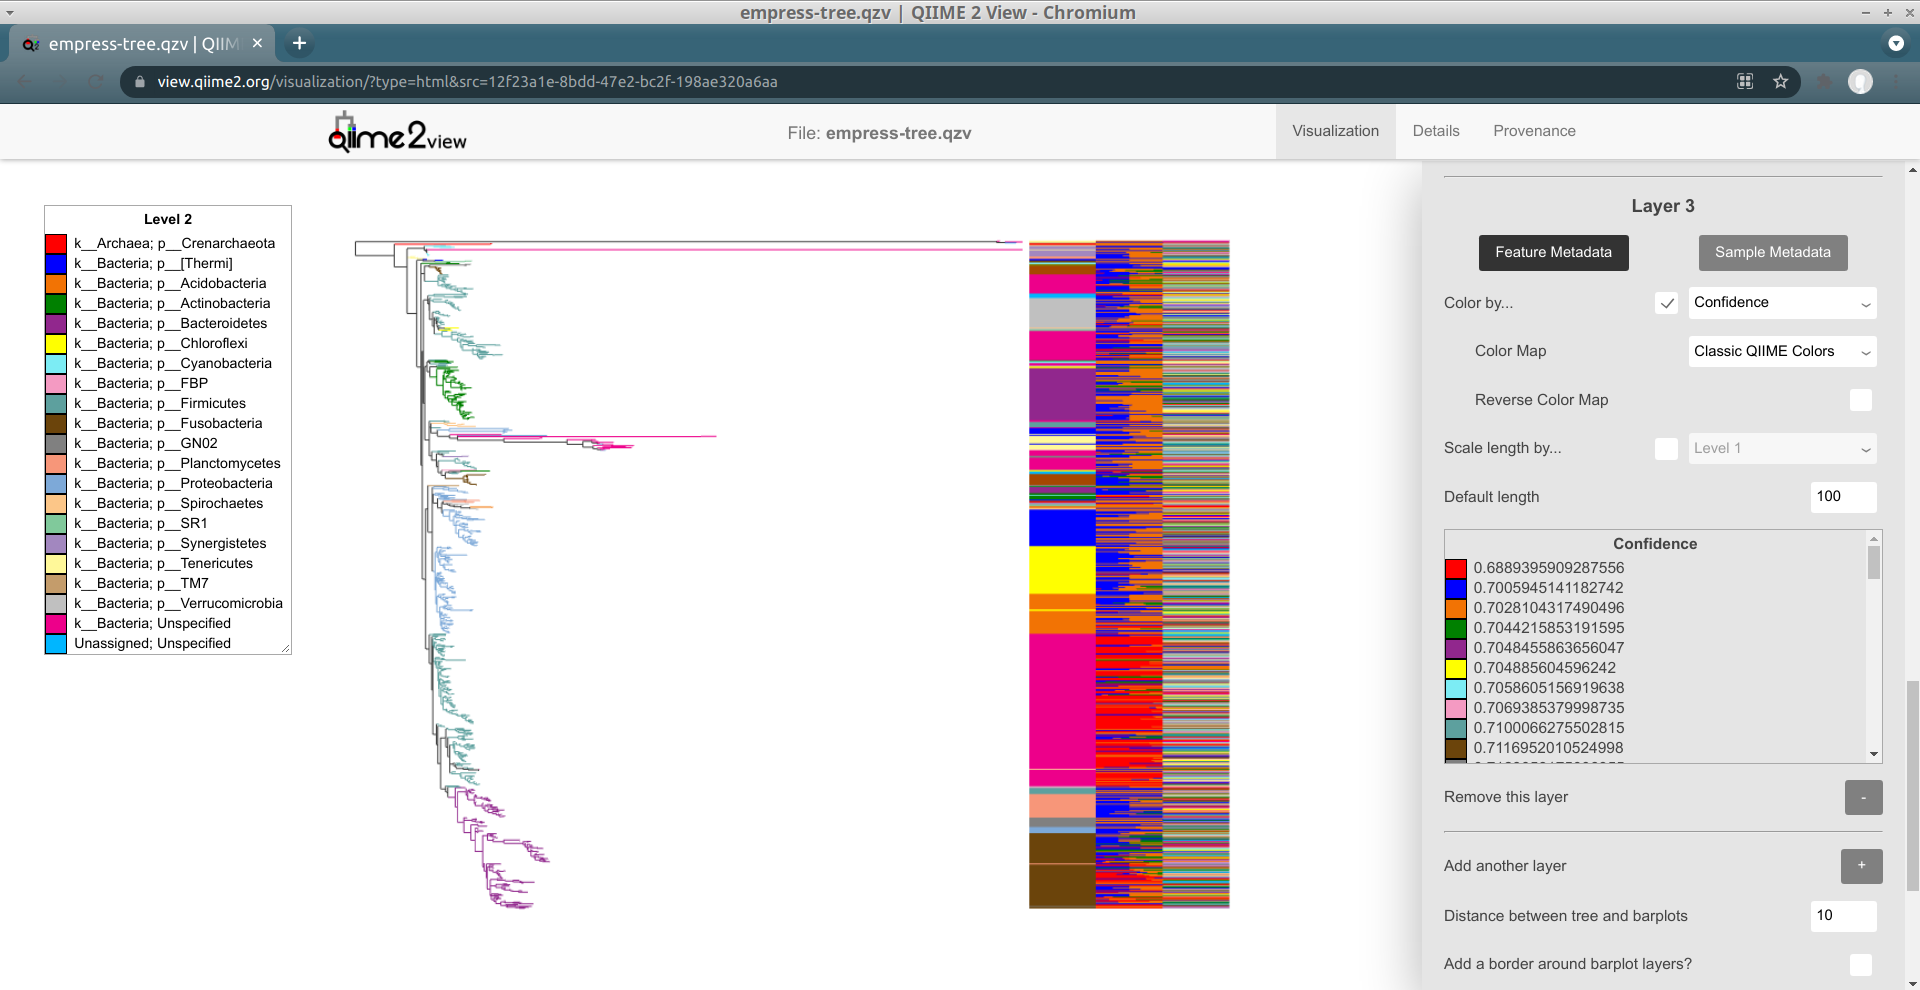 empress barplots: zoomed in on barplots: class coloring layer 1, bodysite layer 2, categorical-colored confidence layer 3